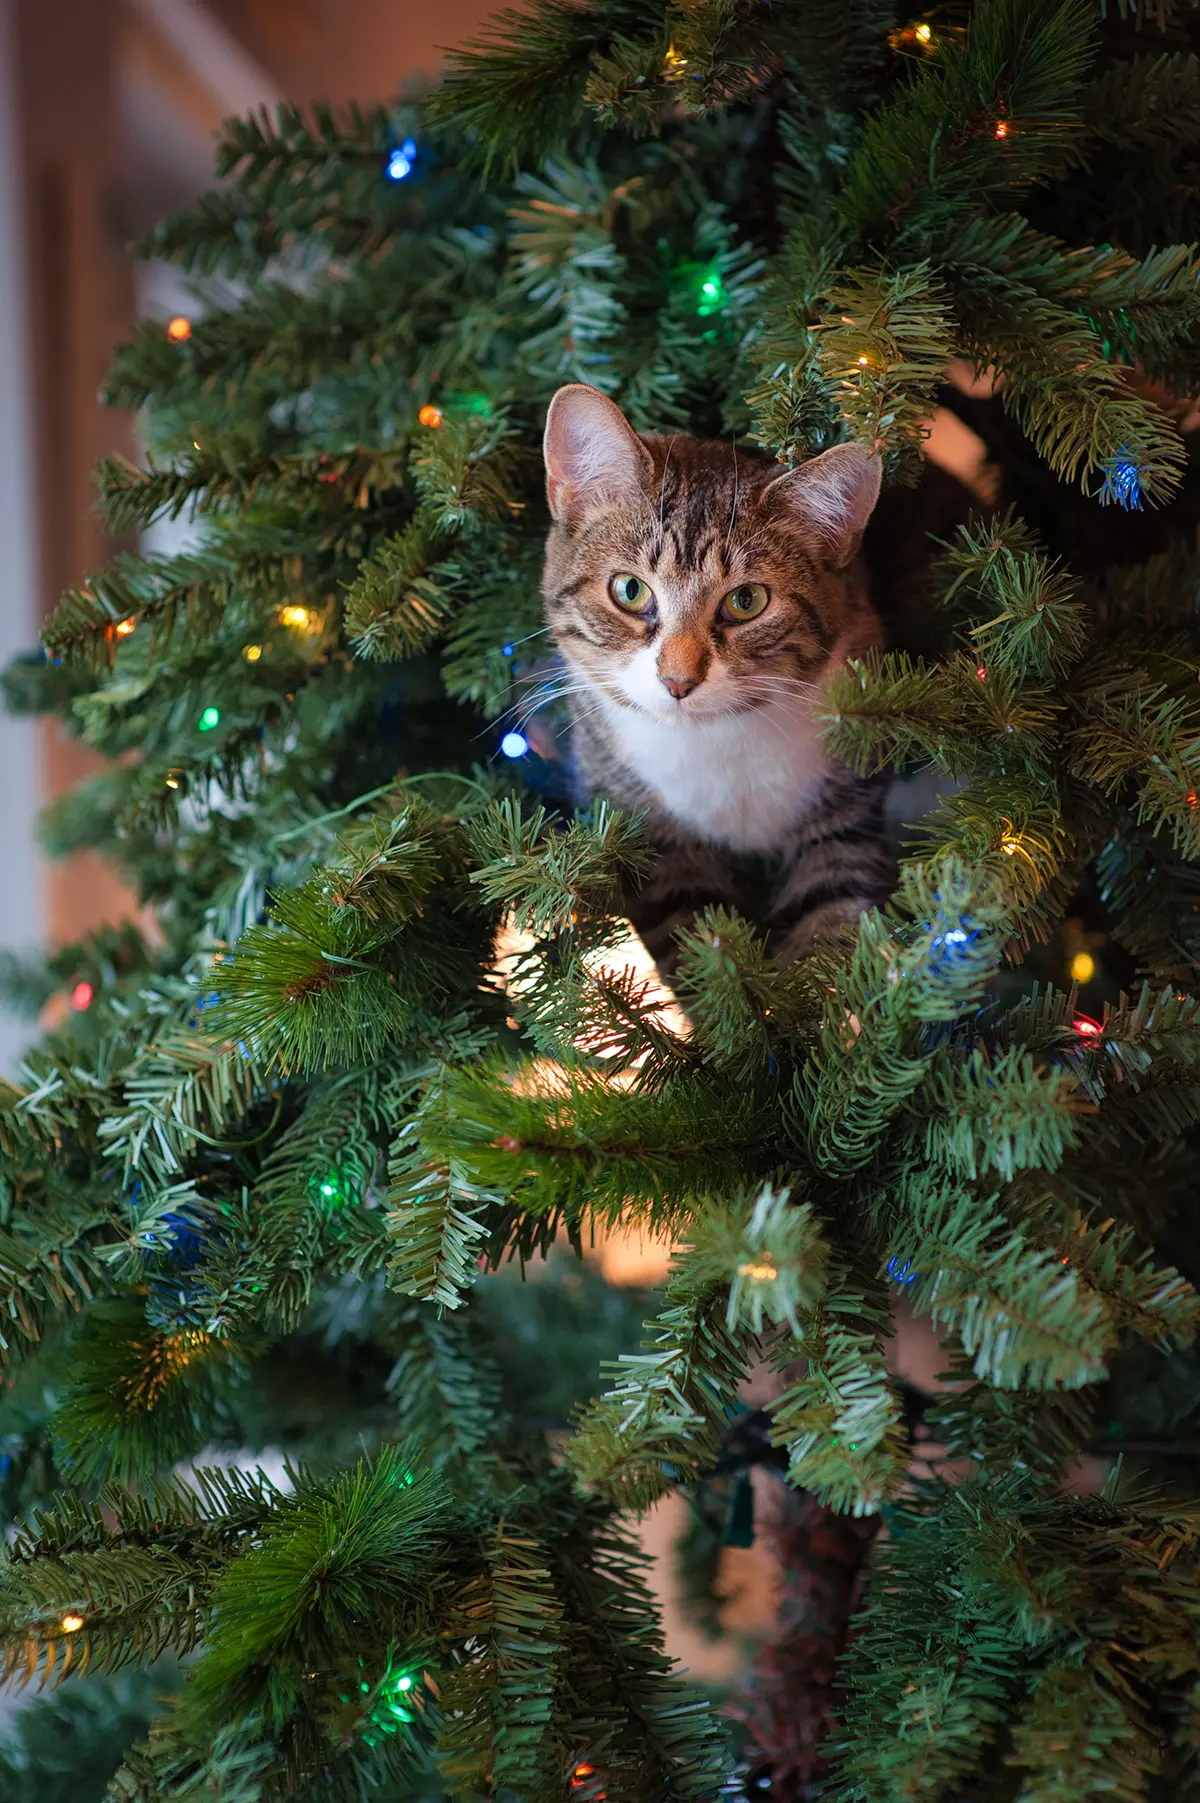 How do you keep the cat away from the Christmas tree?